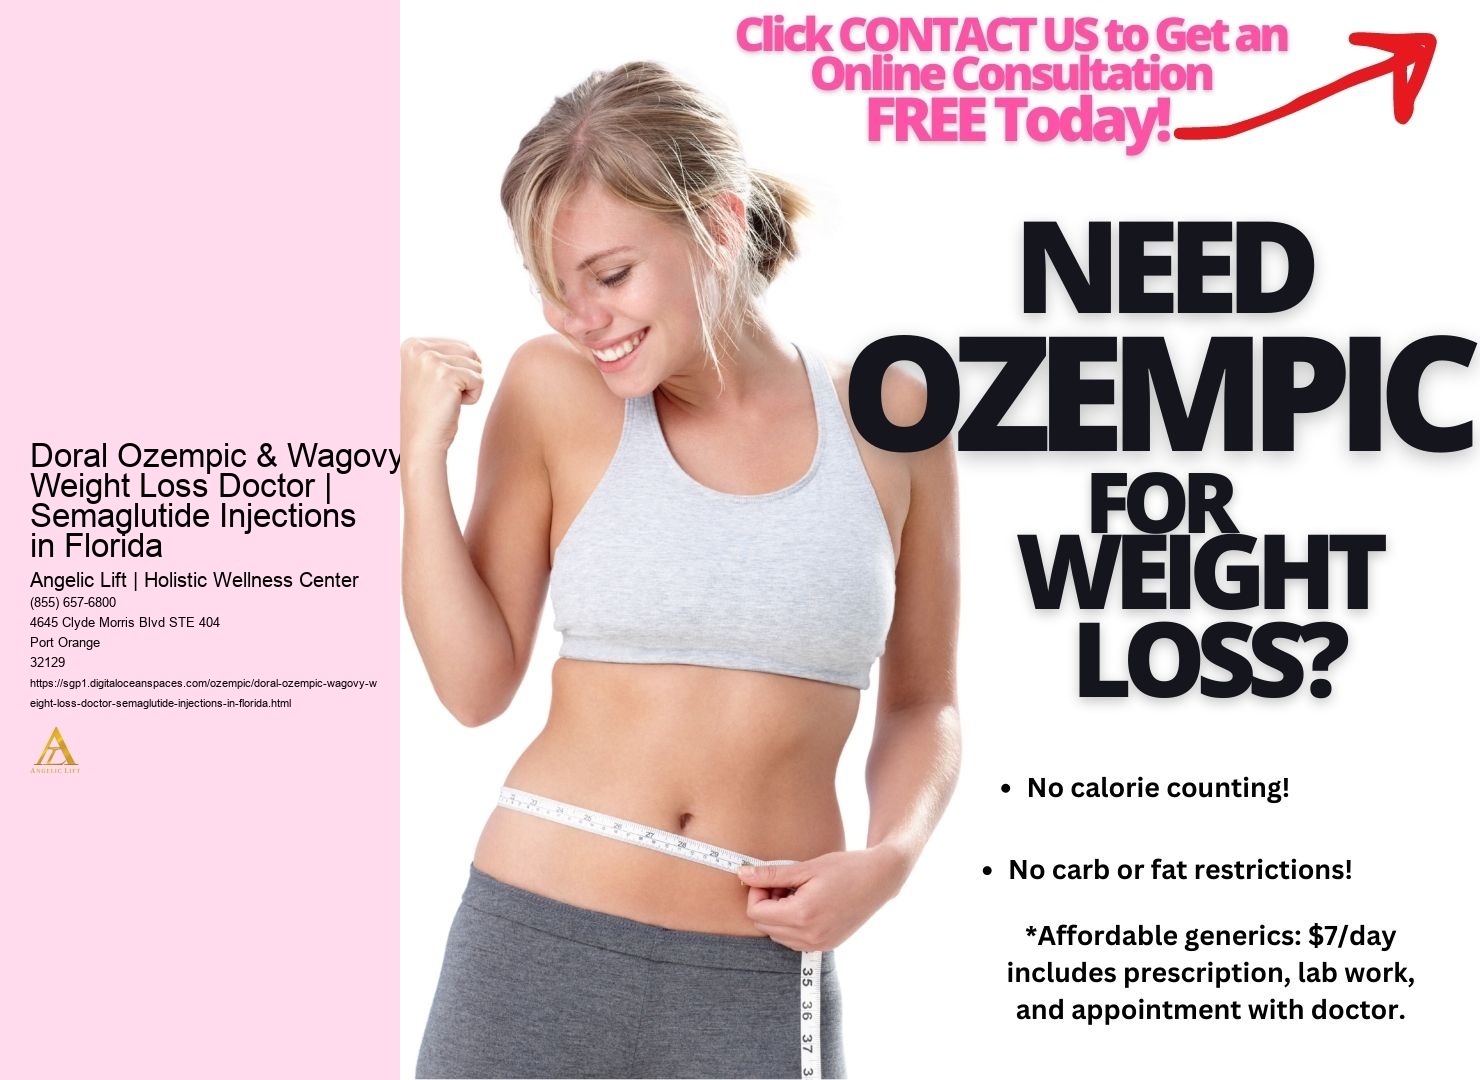 Doral Ozempic & Wagovy Weight Loss Doctor | Semaglutide Injections in Florida